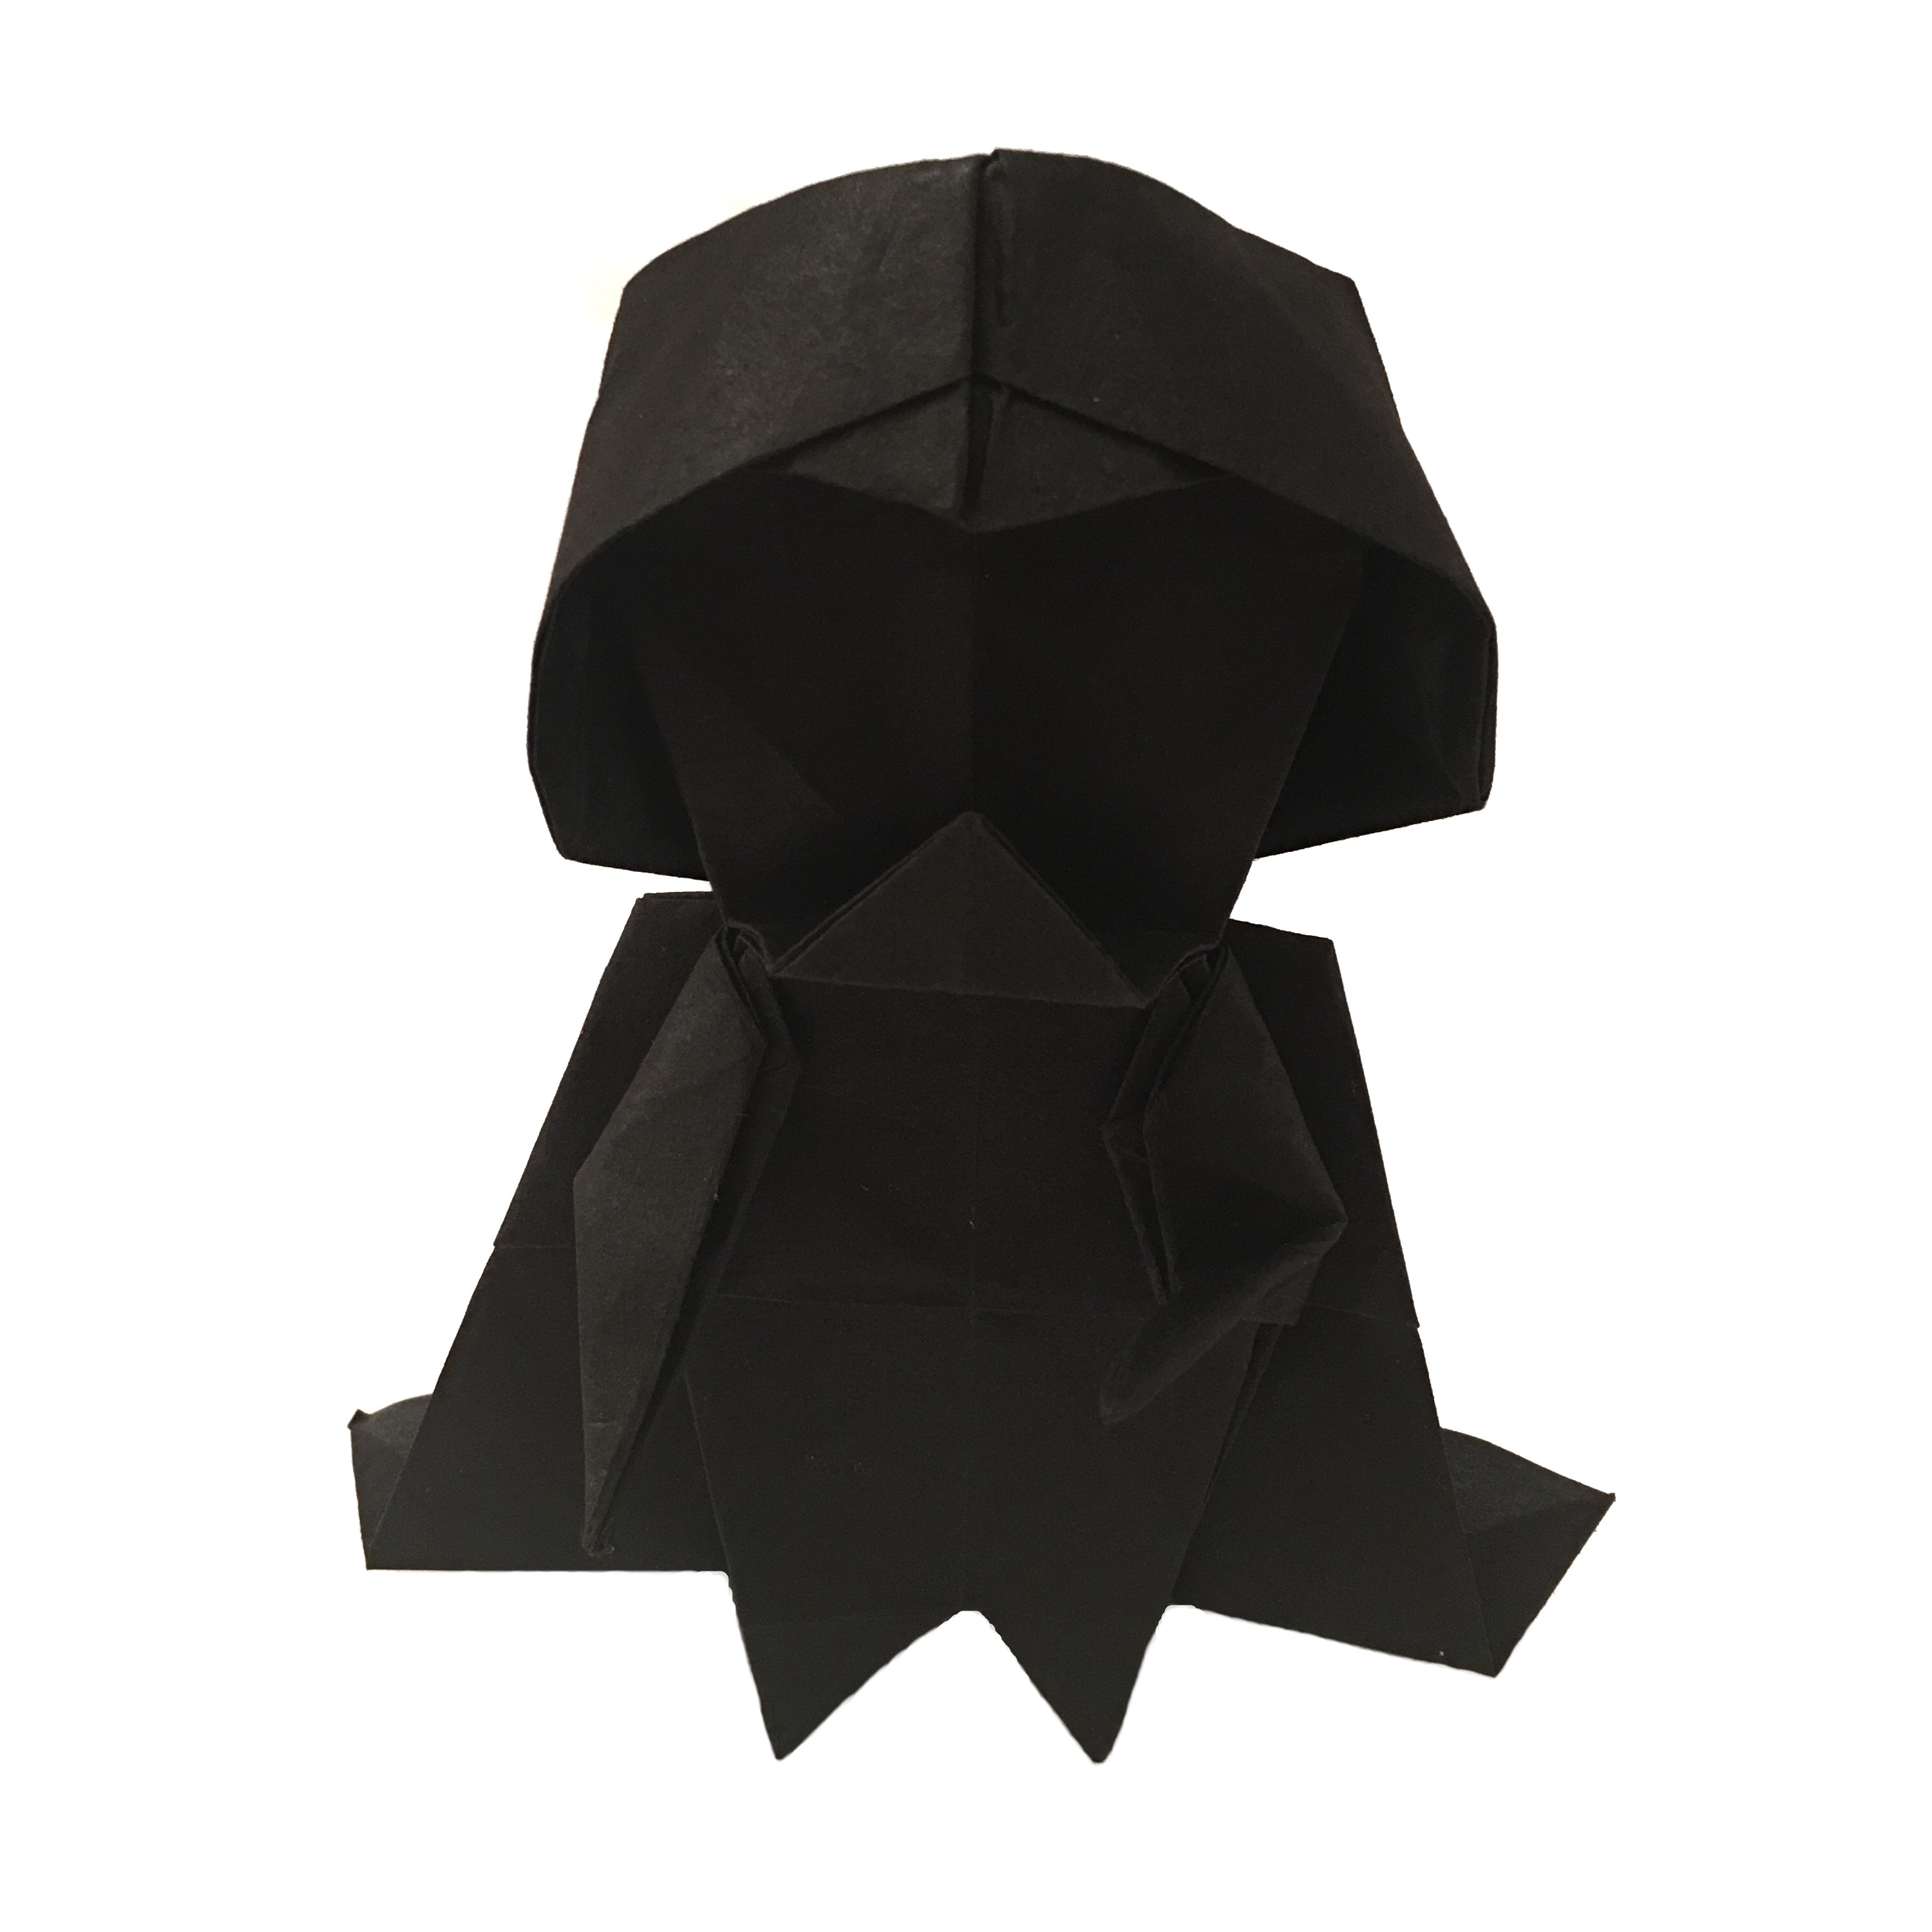 An Origami Darth Vader For Star Wars Day Origami Expressions